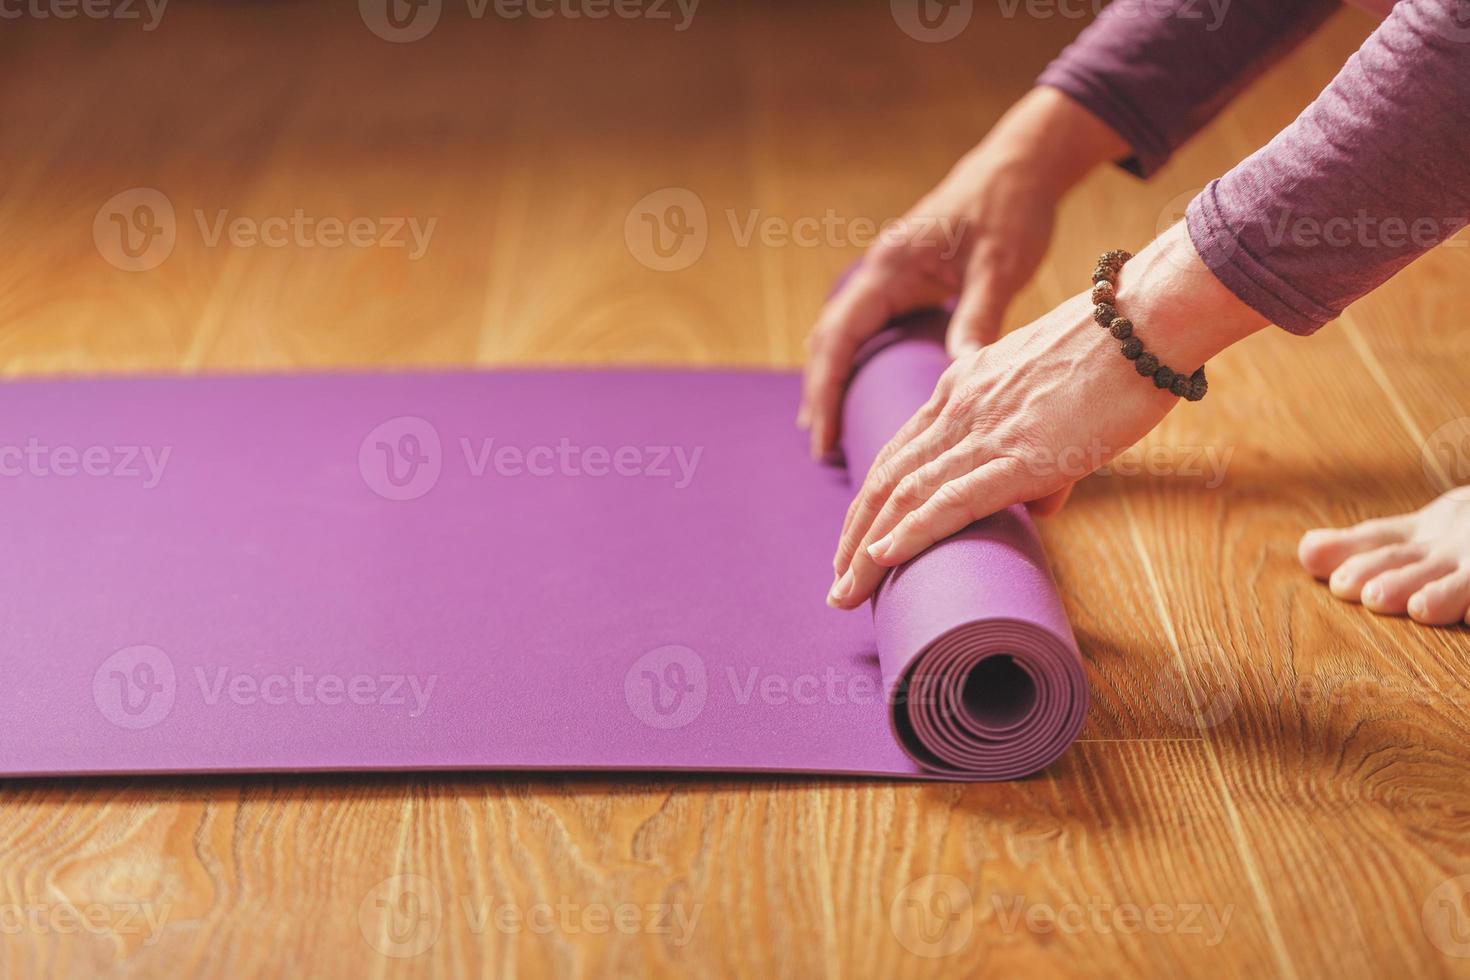 A man lays out a lilac yoga mat on the wooden floor of a house photo